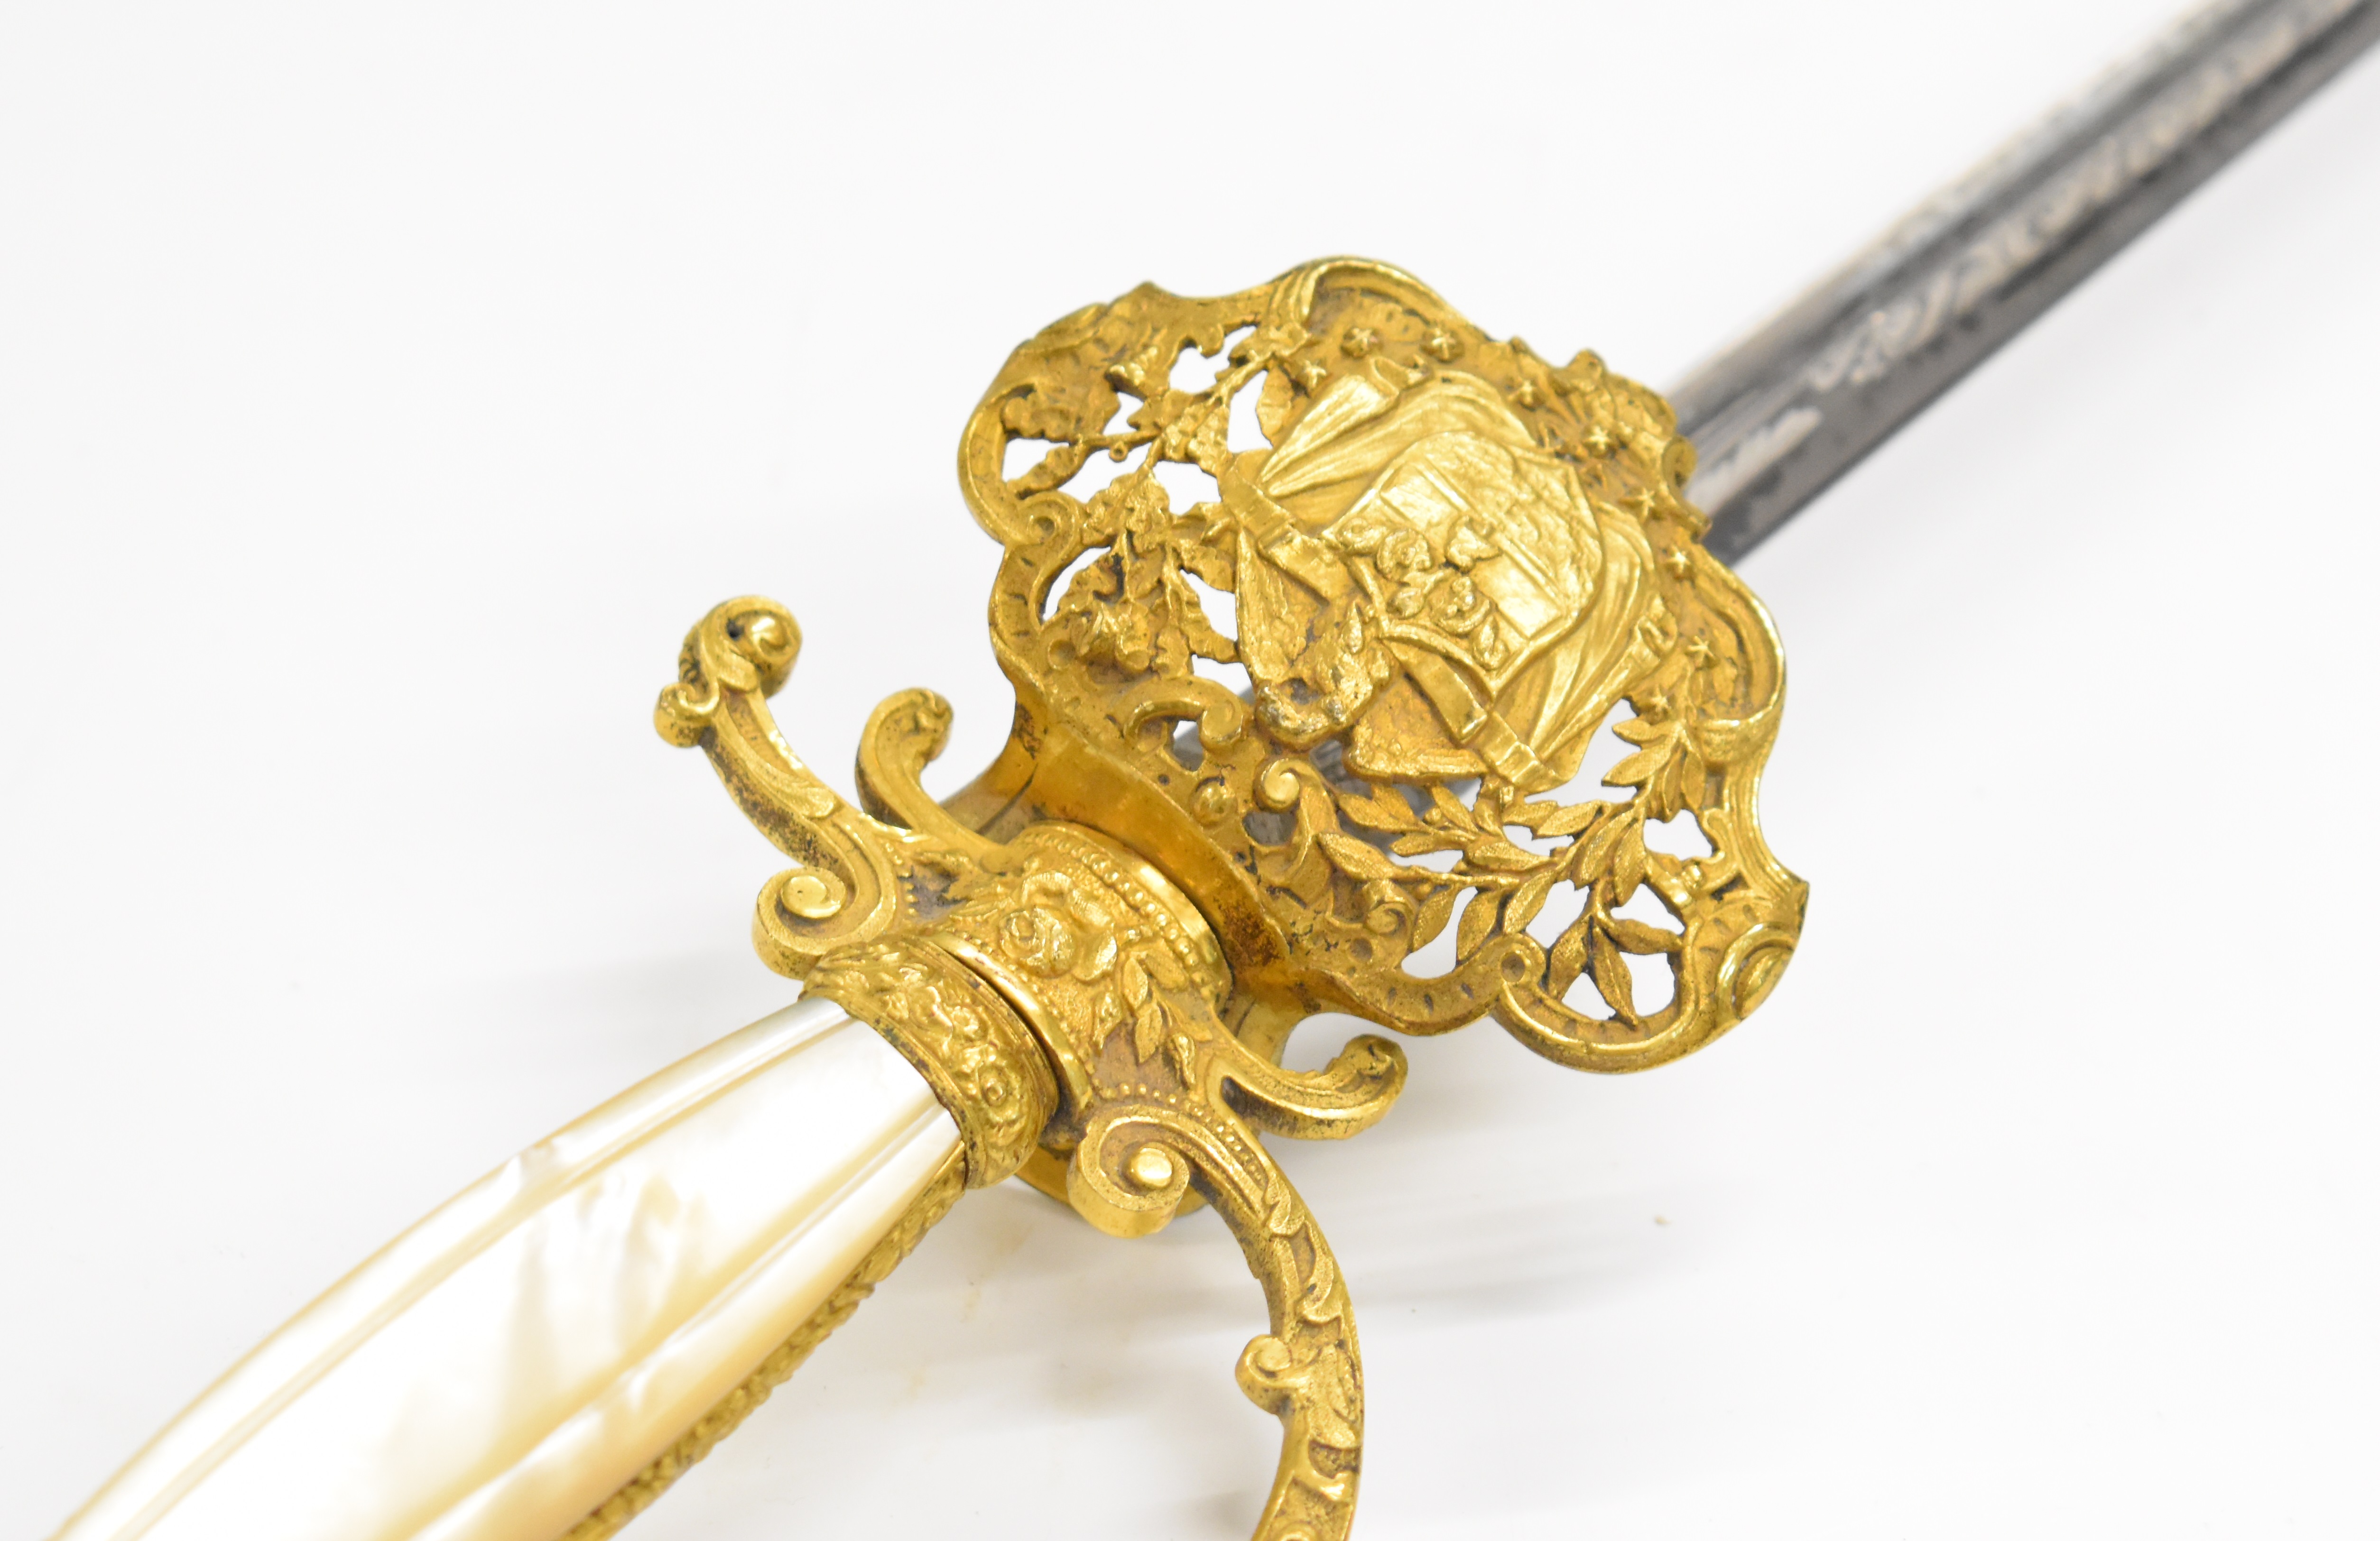 French made court sword retailed by Maria 14 Rue de Septembre Paris with gilt decorated hilt and - Image 5 of 11